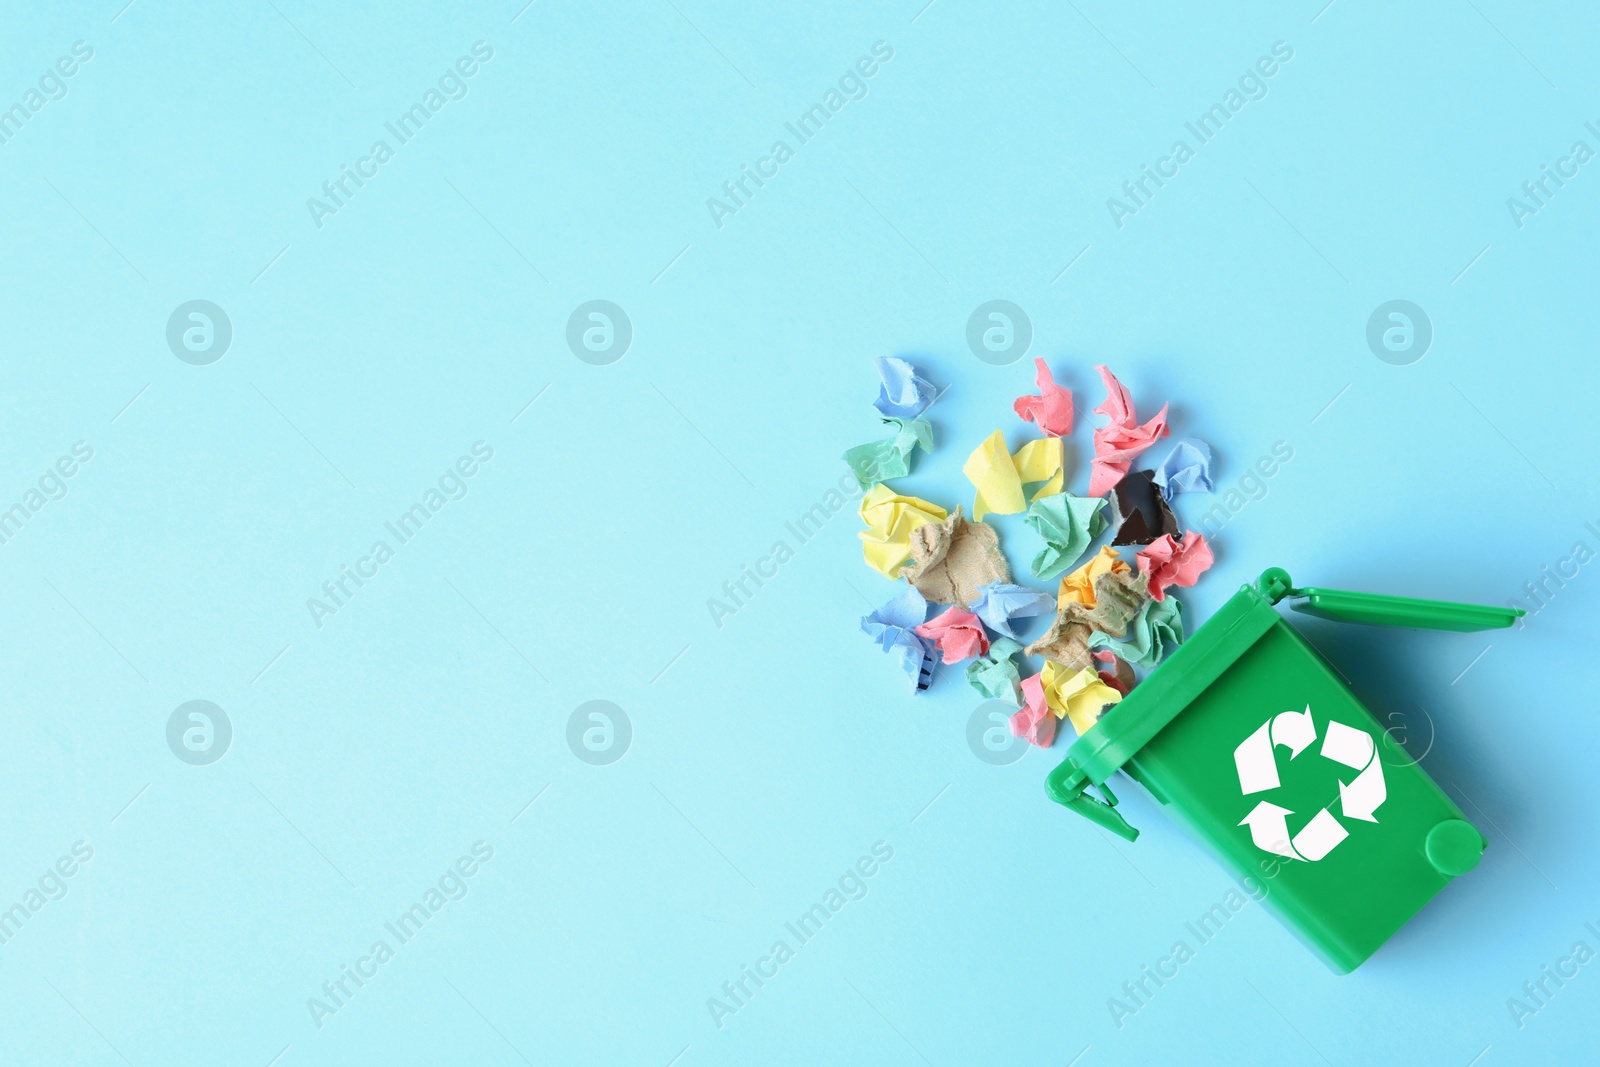 Photo of Trash bin and different garbage on color background, top view with space for text. Waste recycling concept